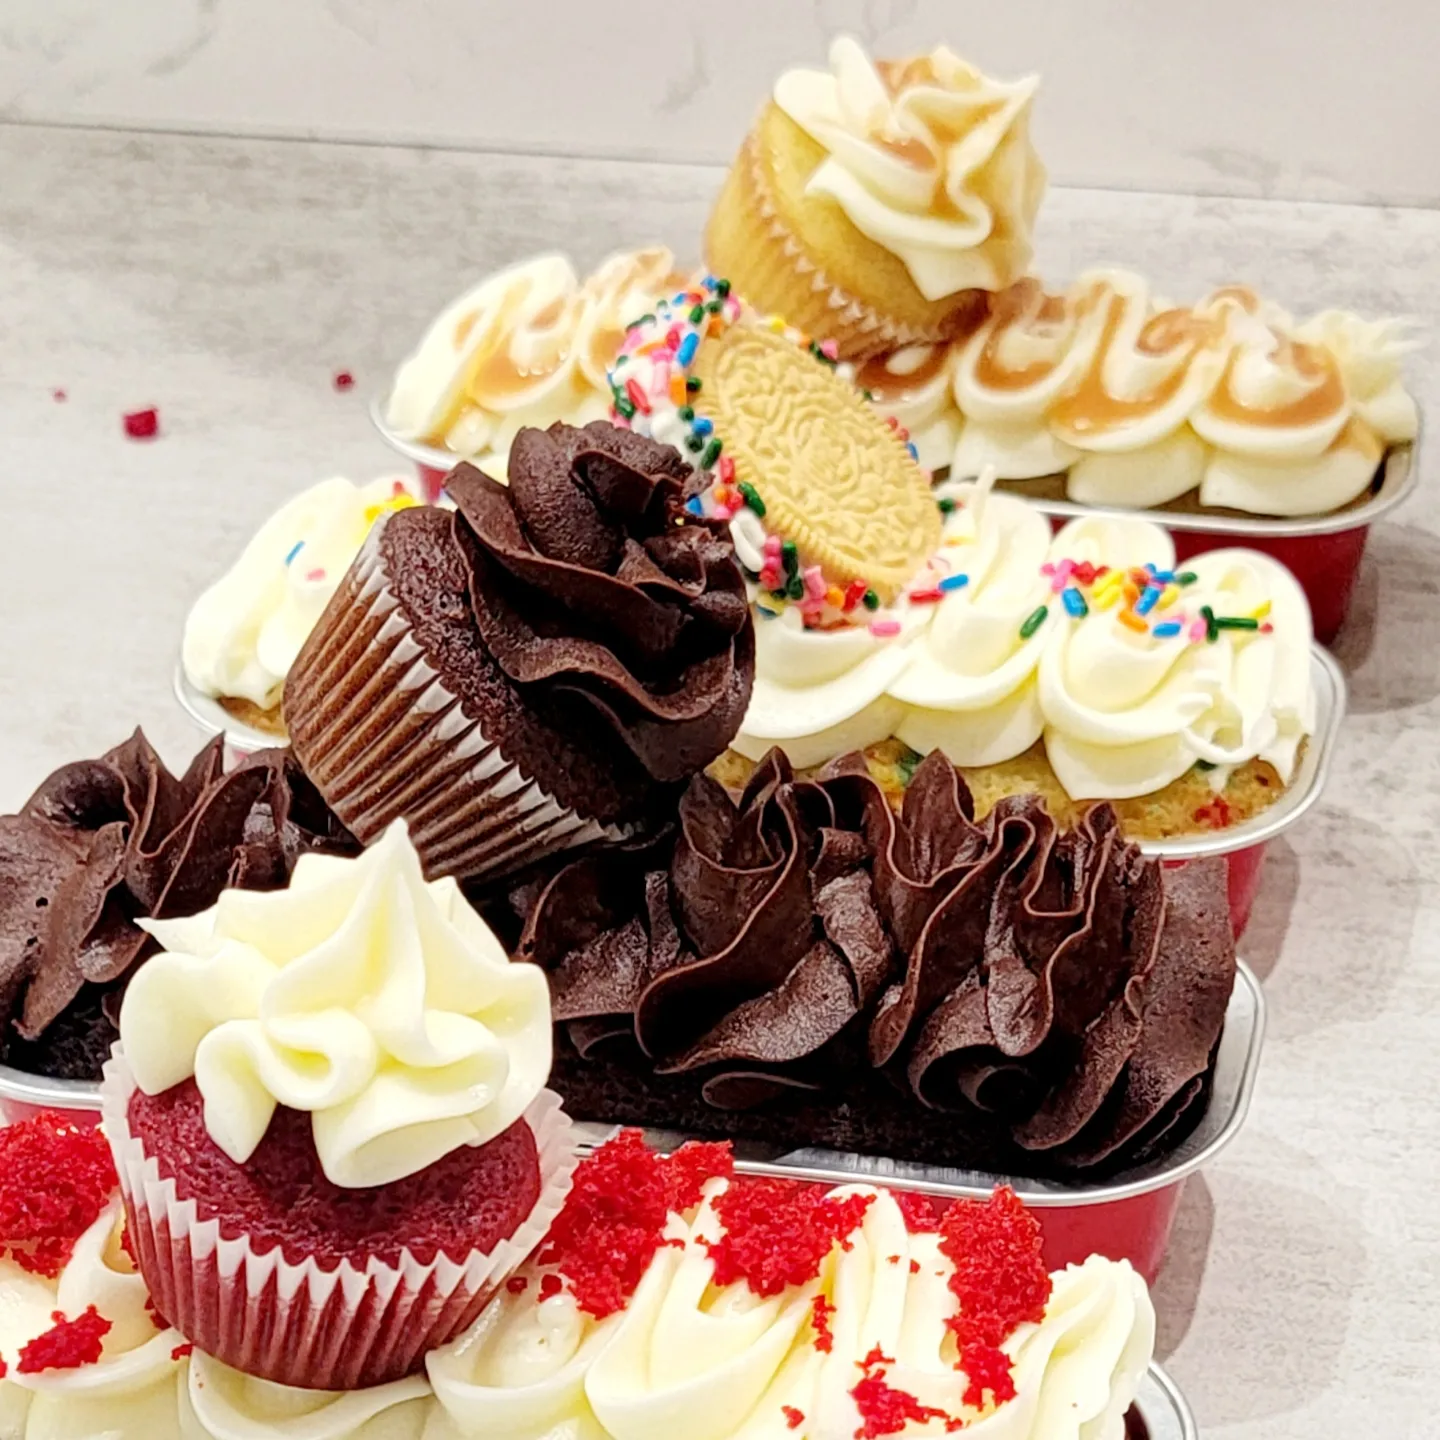 Photo shows beautiful cupcakes and desserts, baked from scratch.